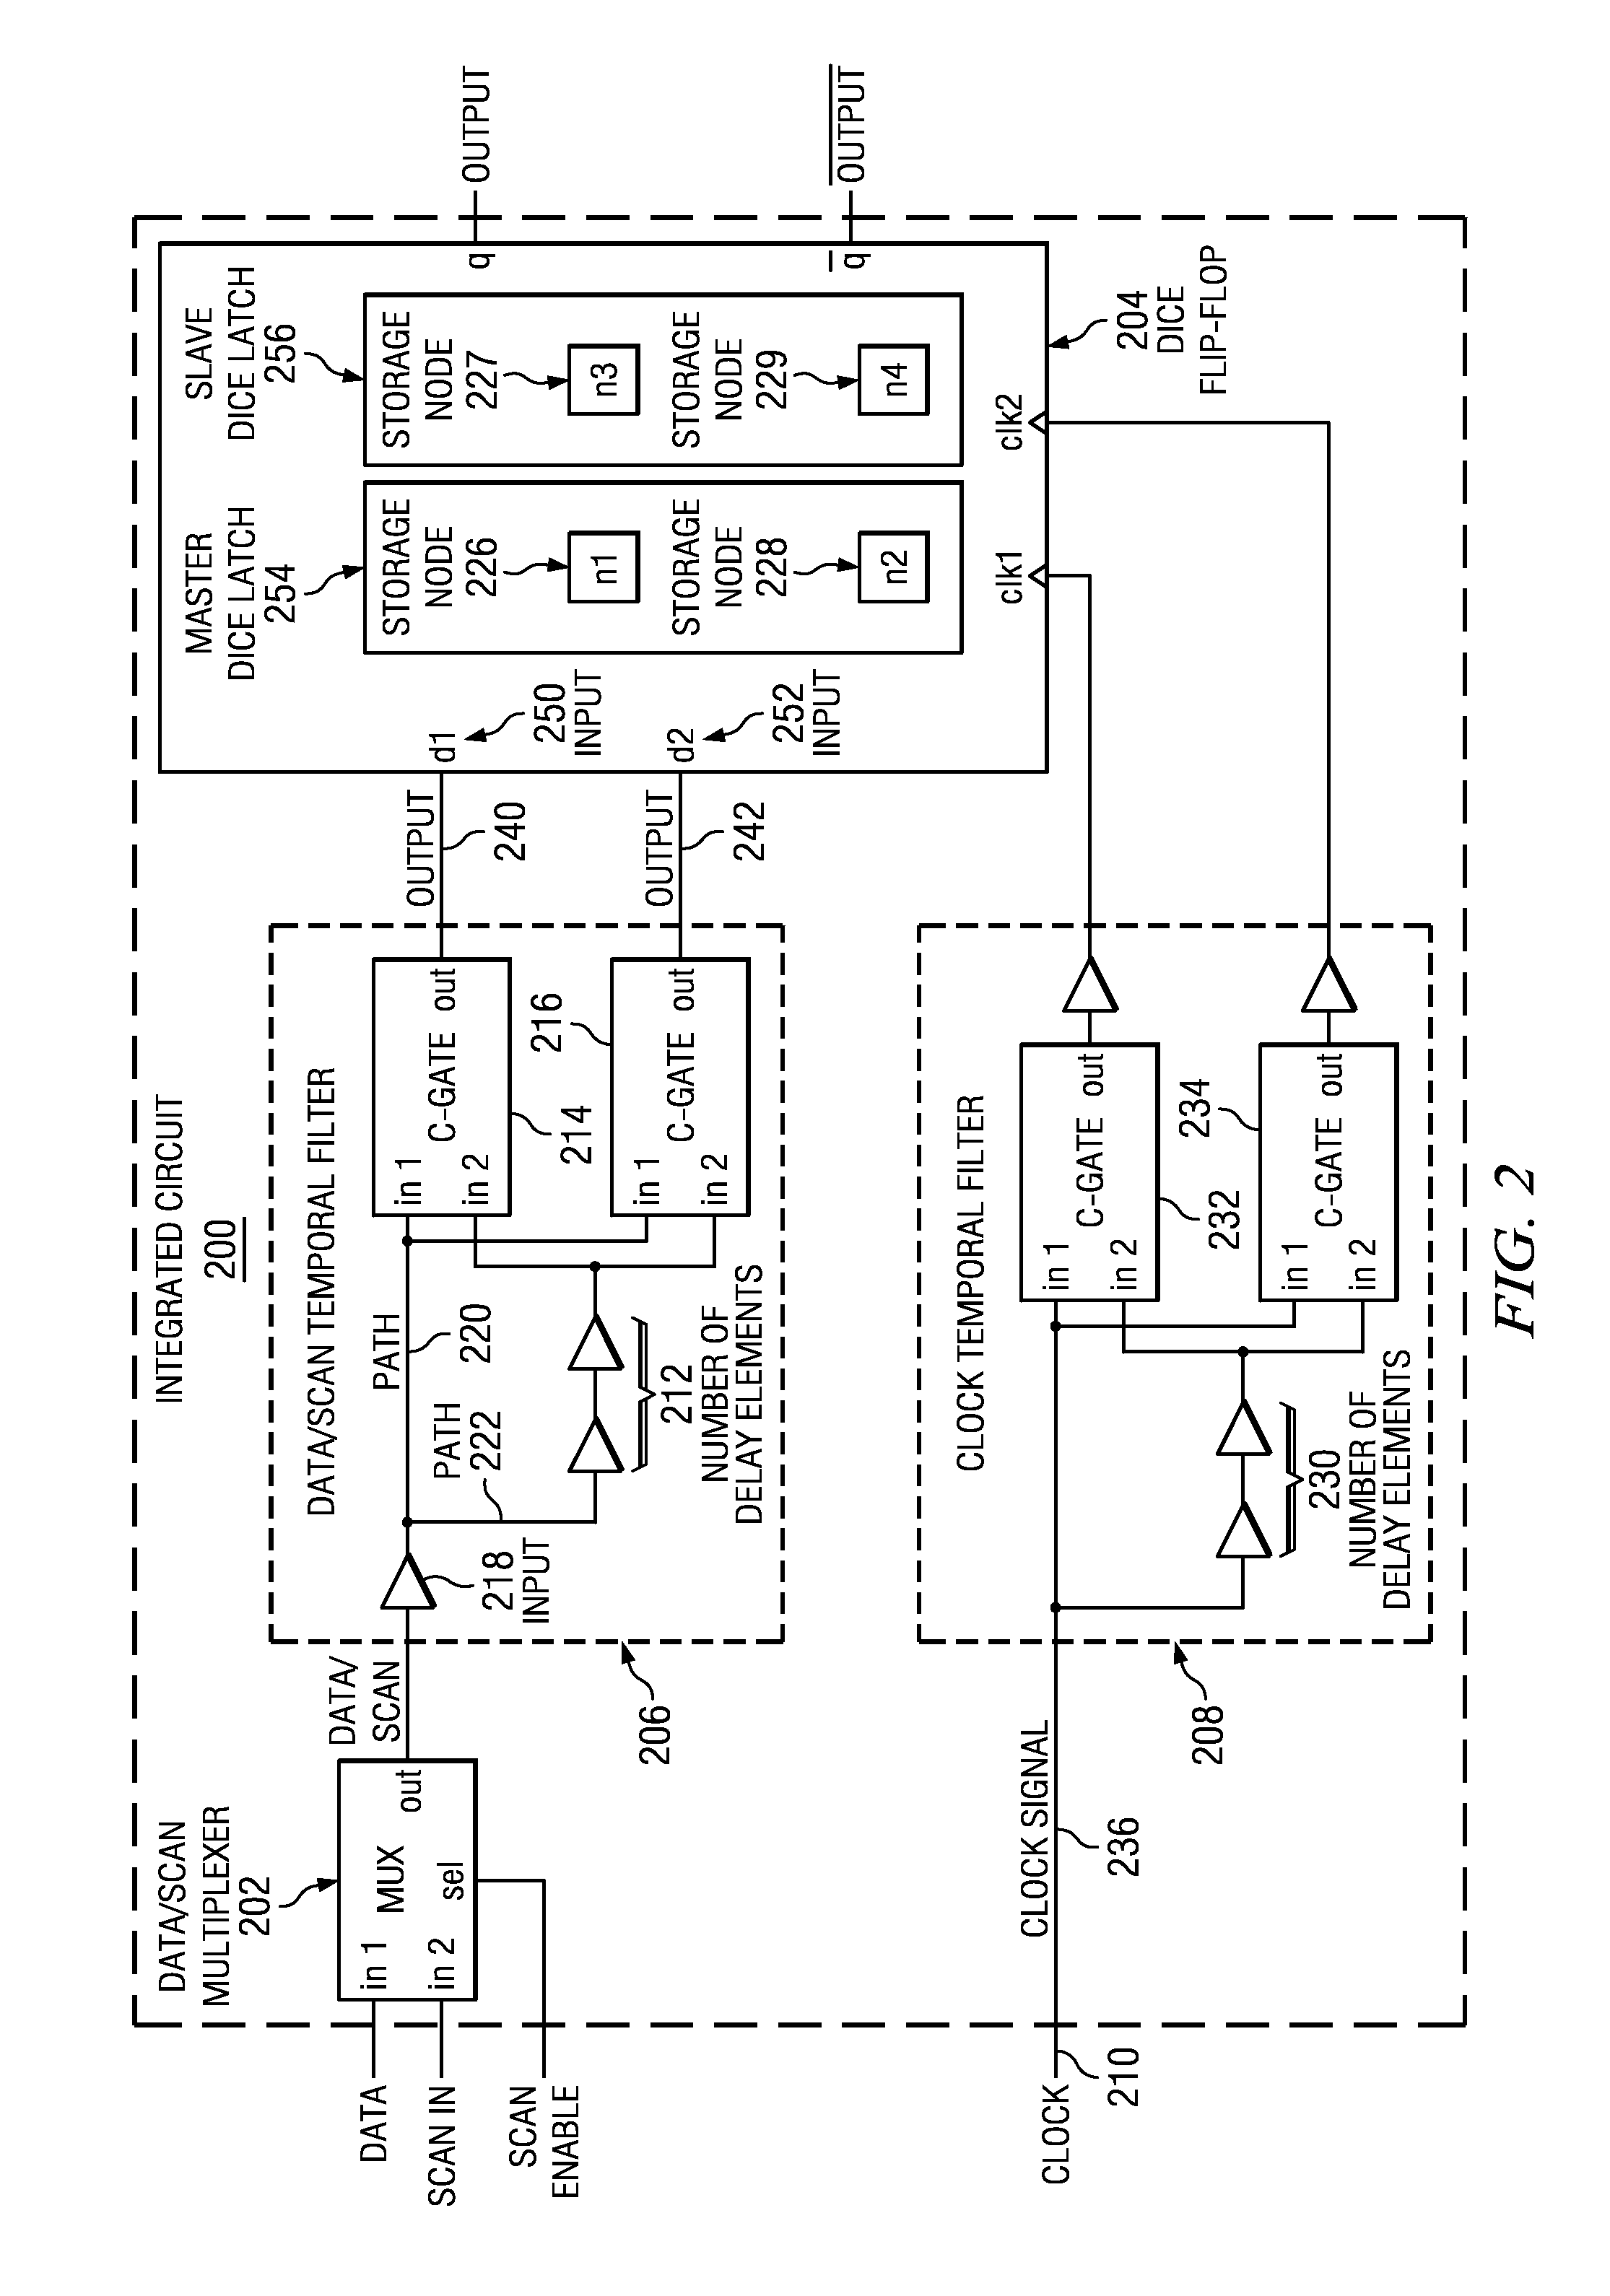 Method and apparatus for reducing radiation and cross-talk induced data errors